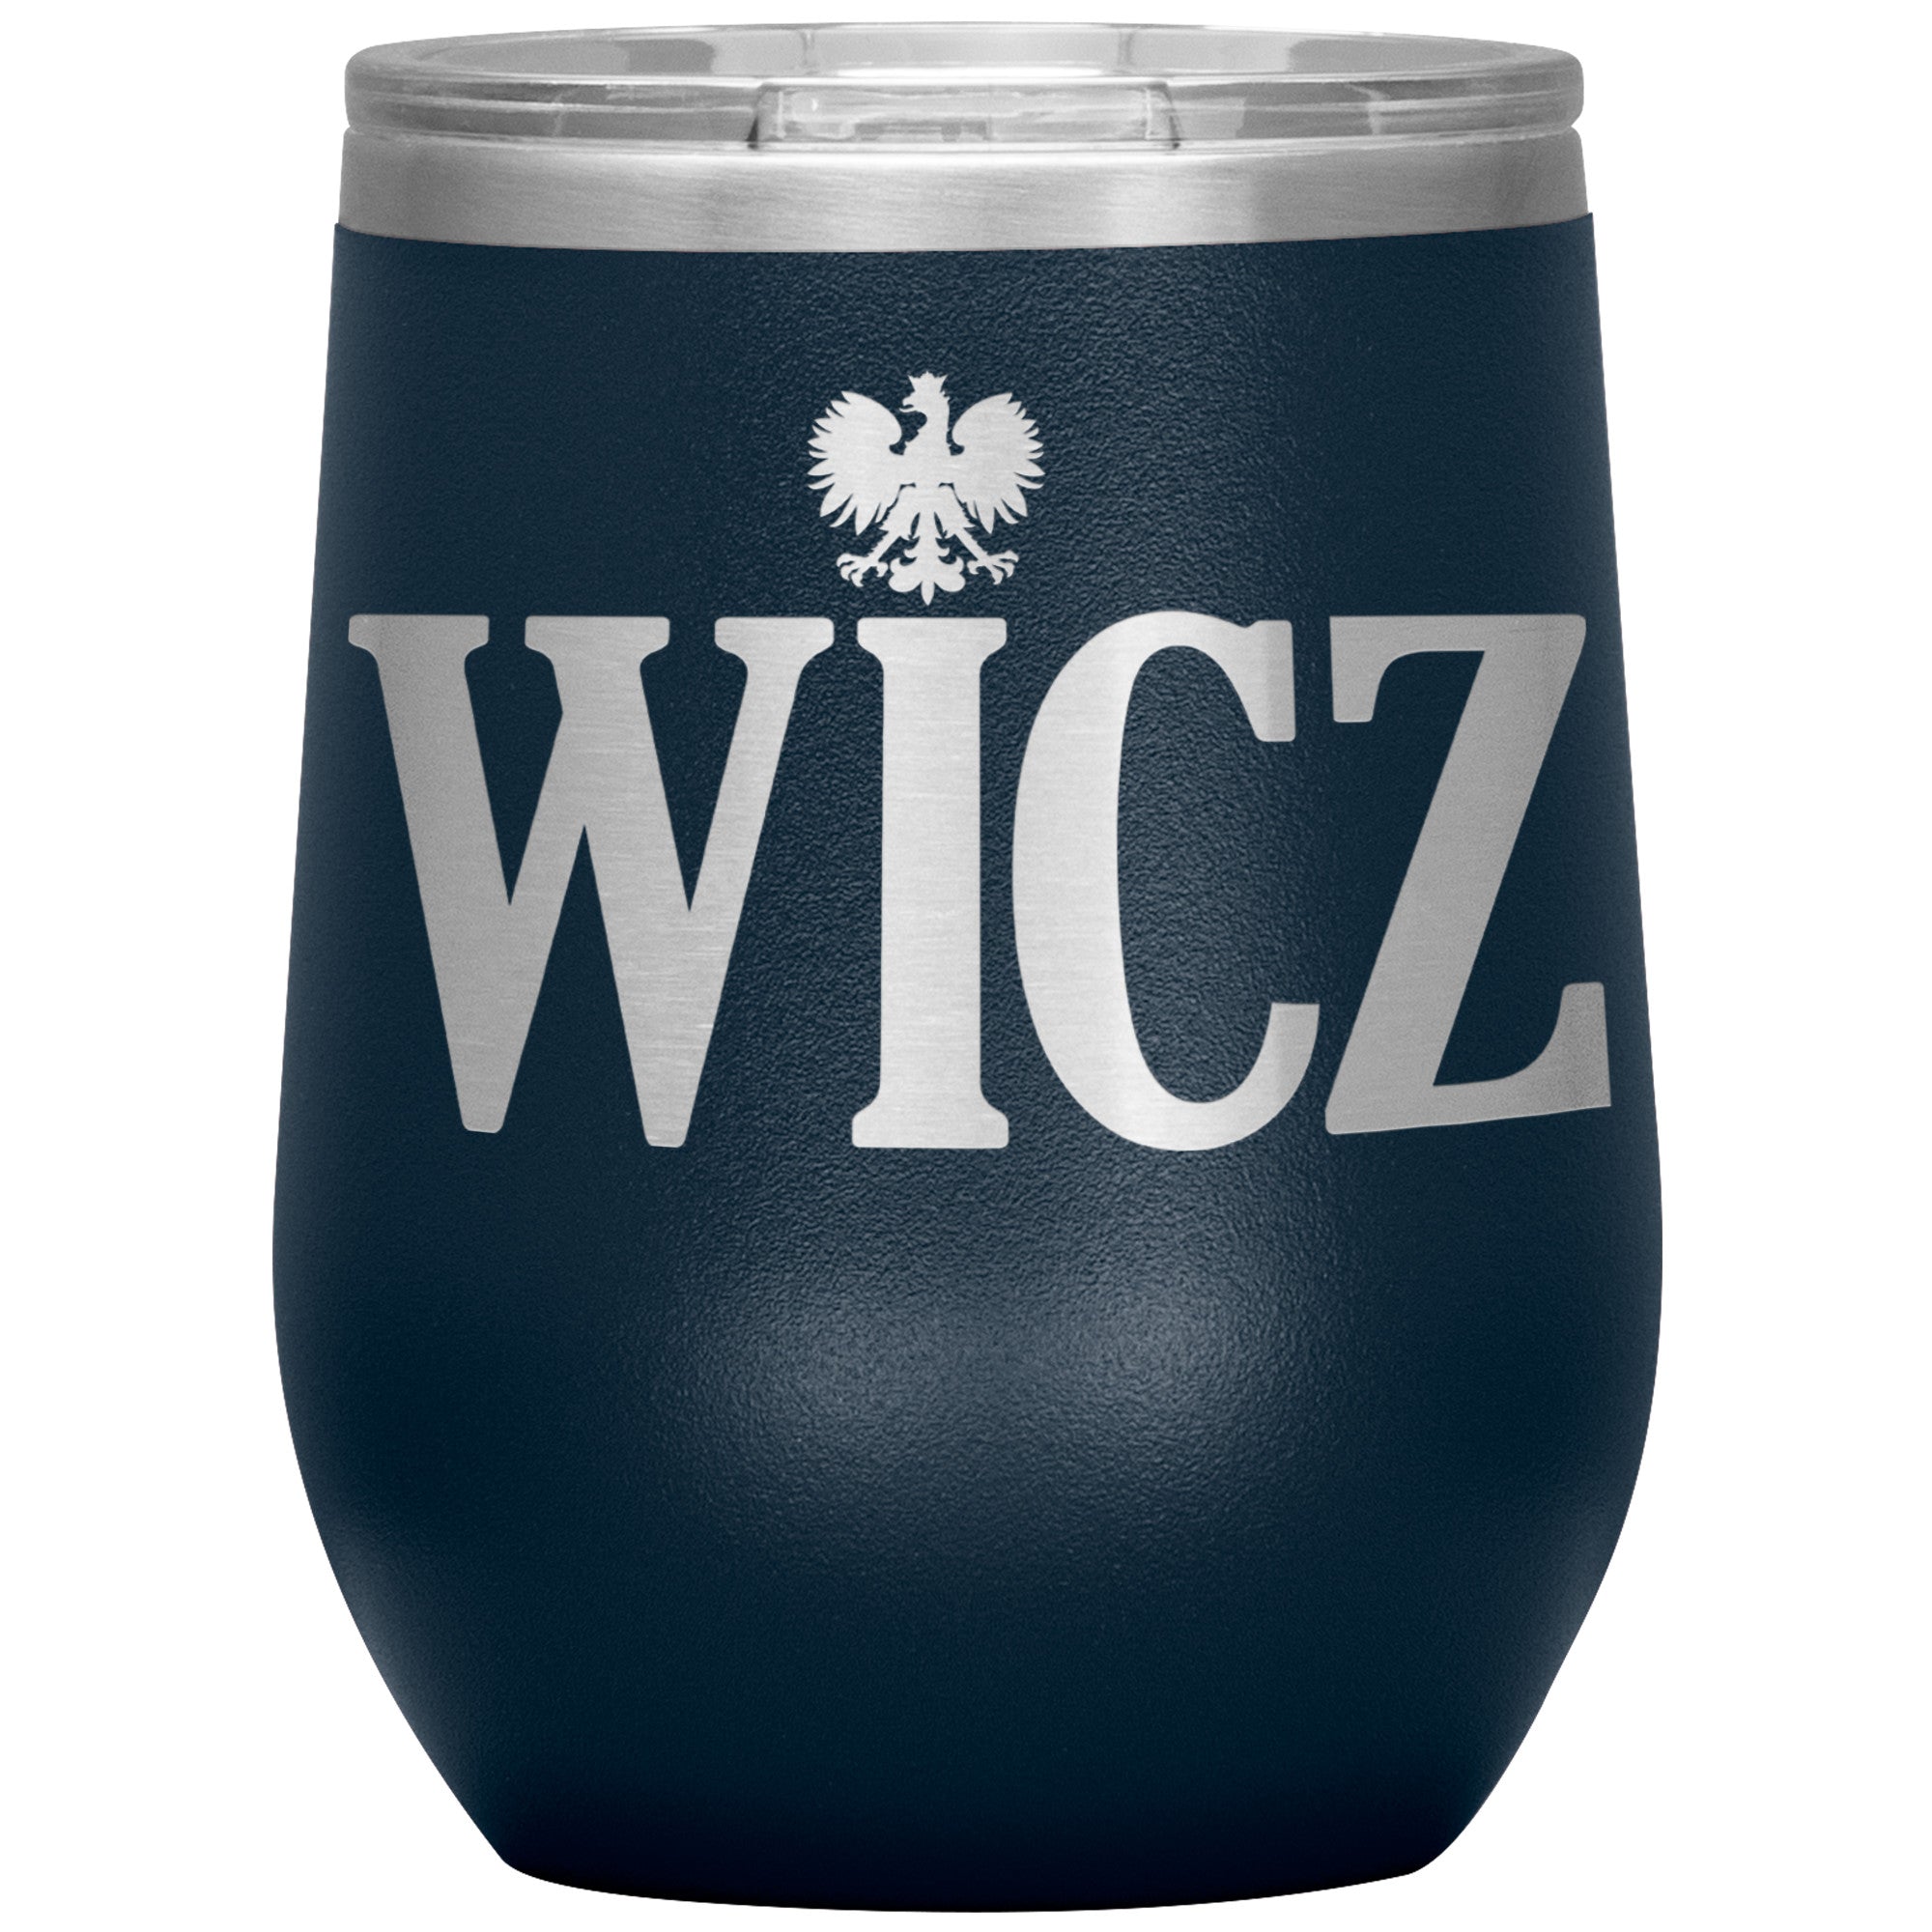 Polish Surname Ending in WICZ Insulated Wine Tumbler Tumblers teelaunch Navy  